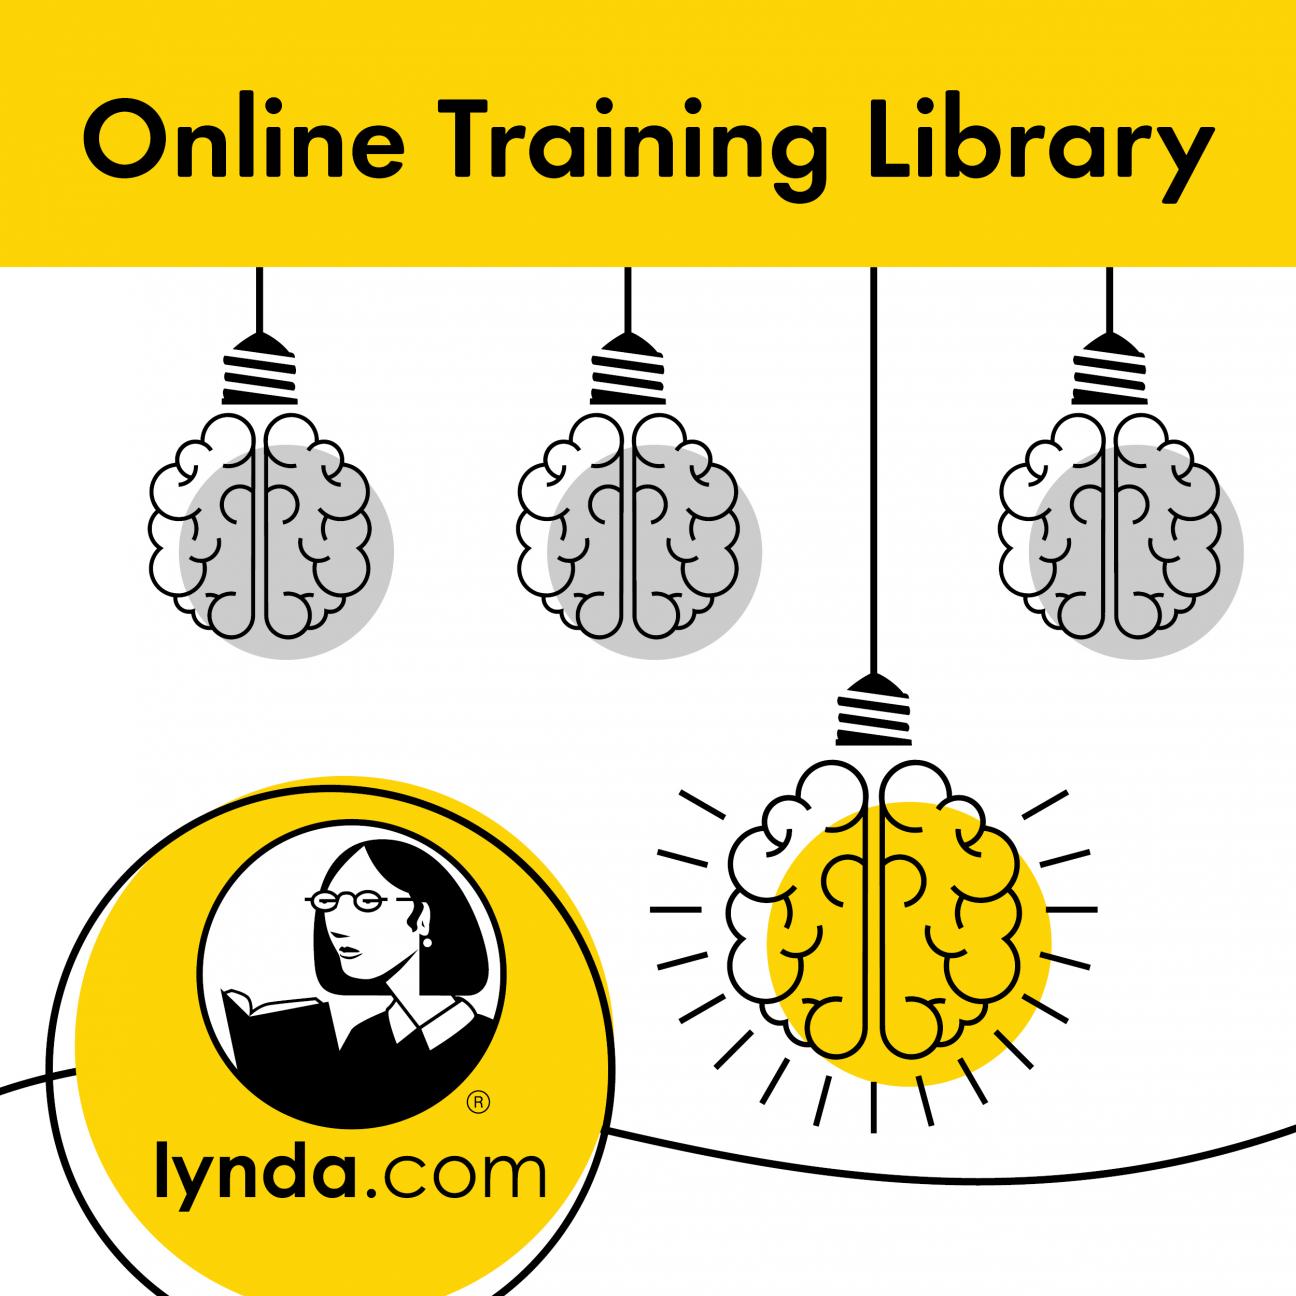 Illustration of light bulbs and the Lynda.com logo of a woman reading a book.